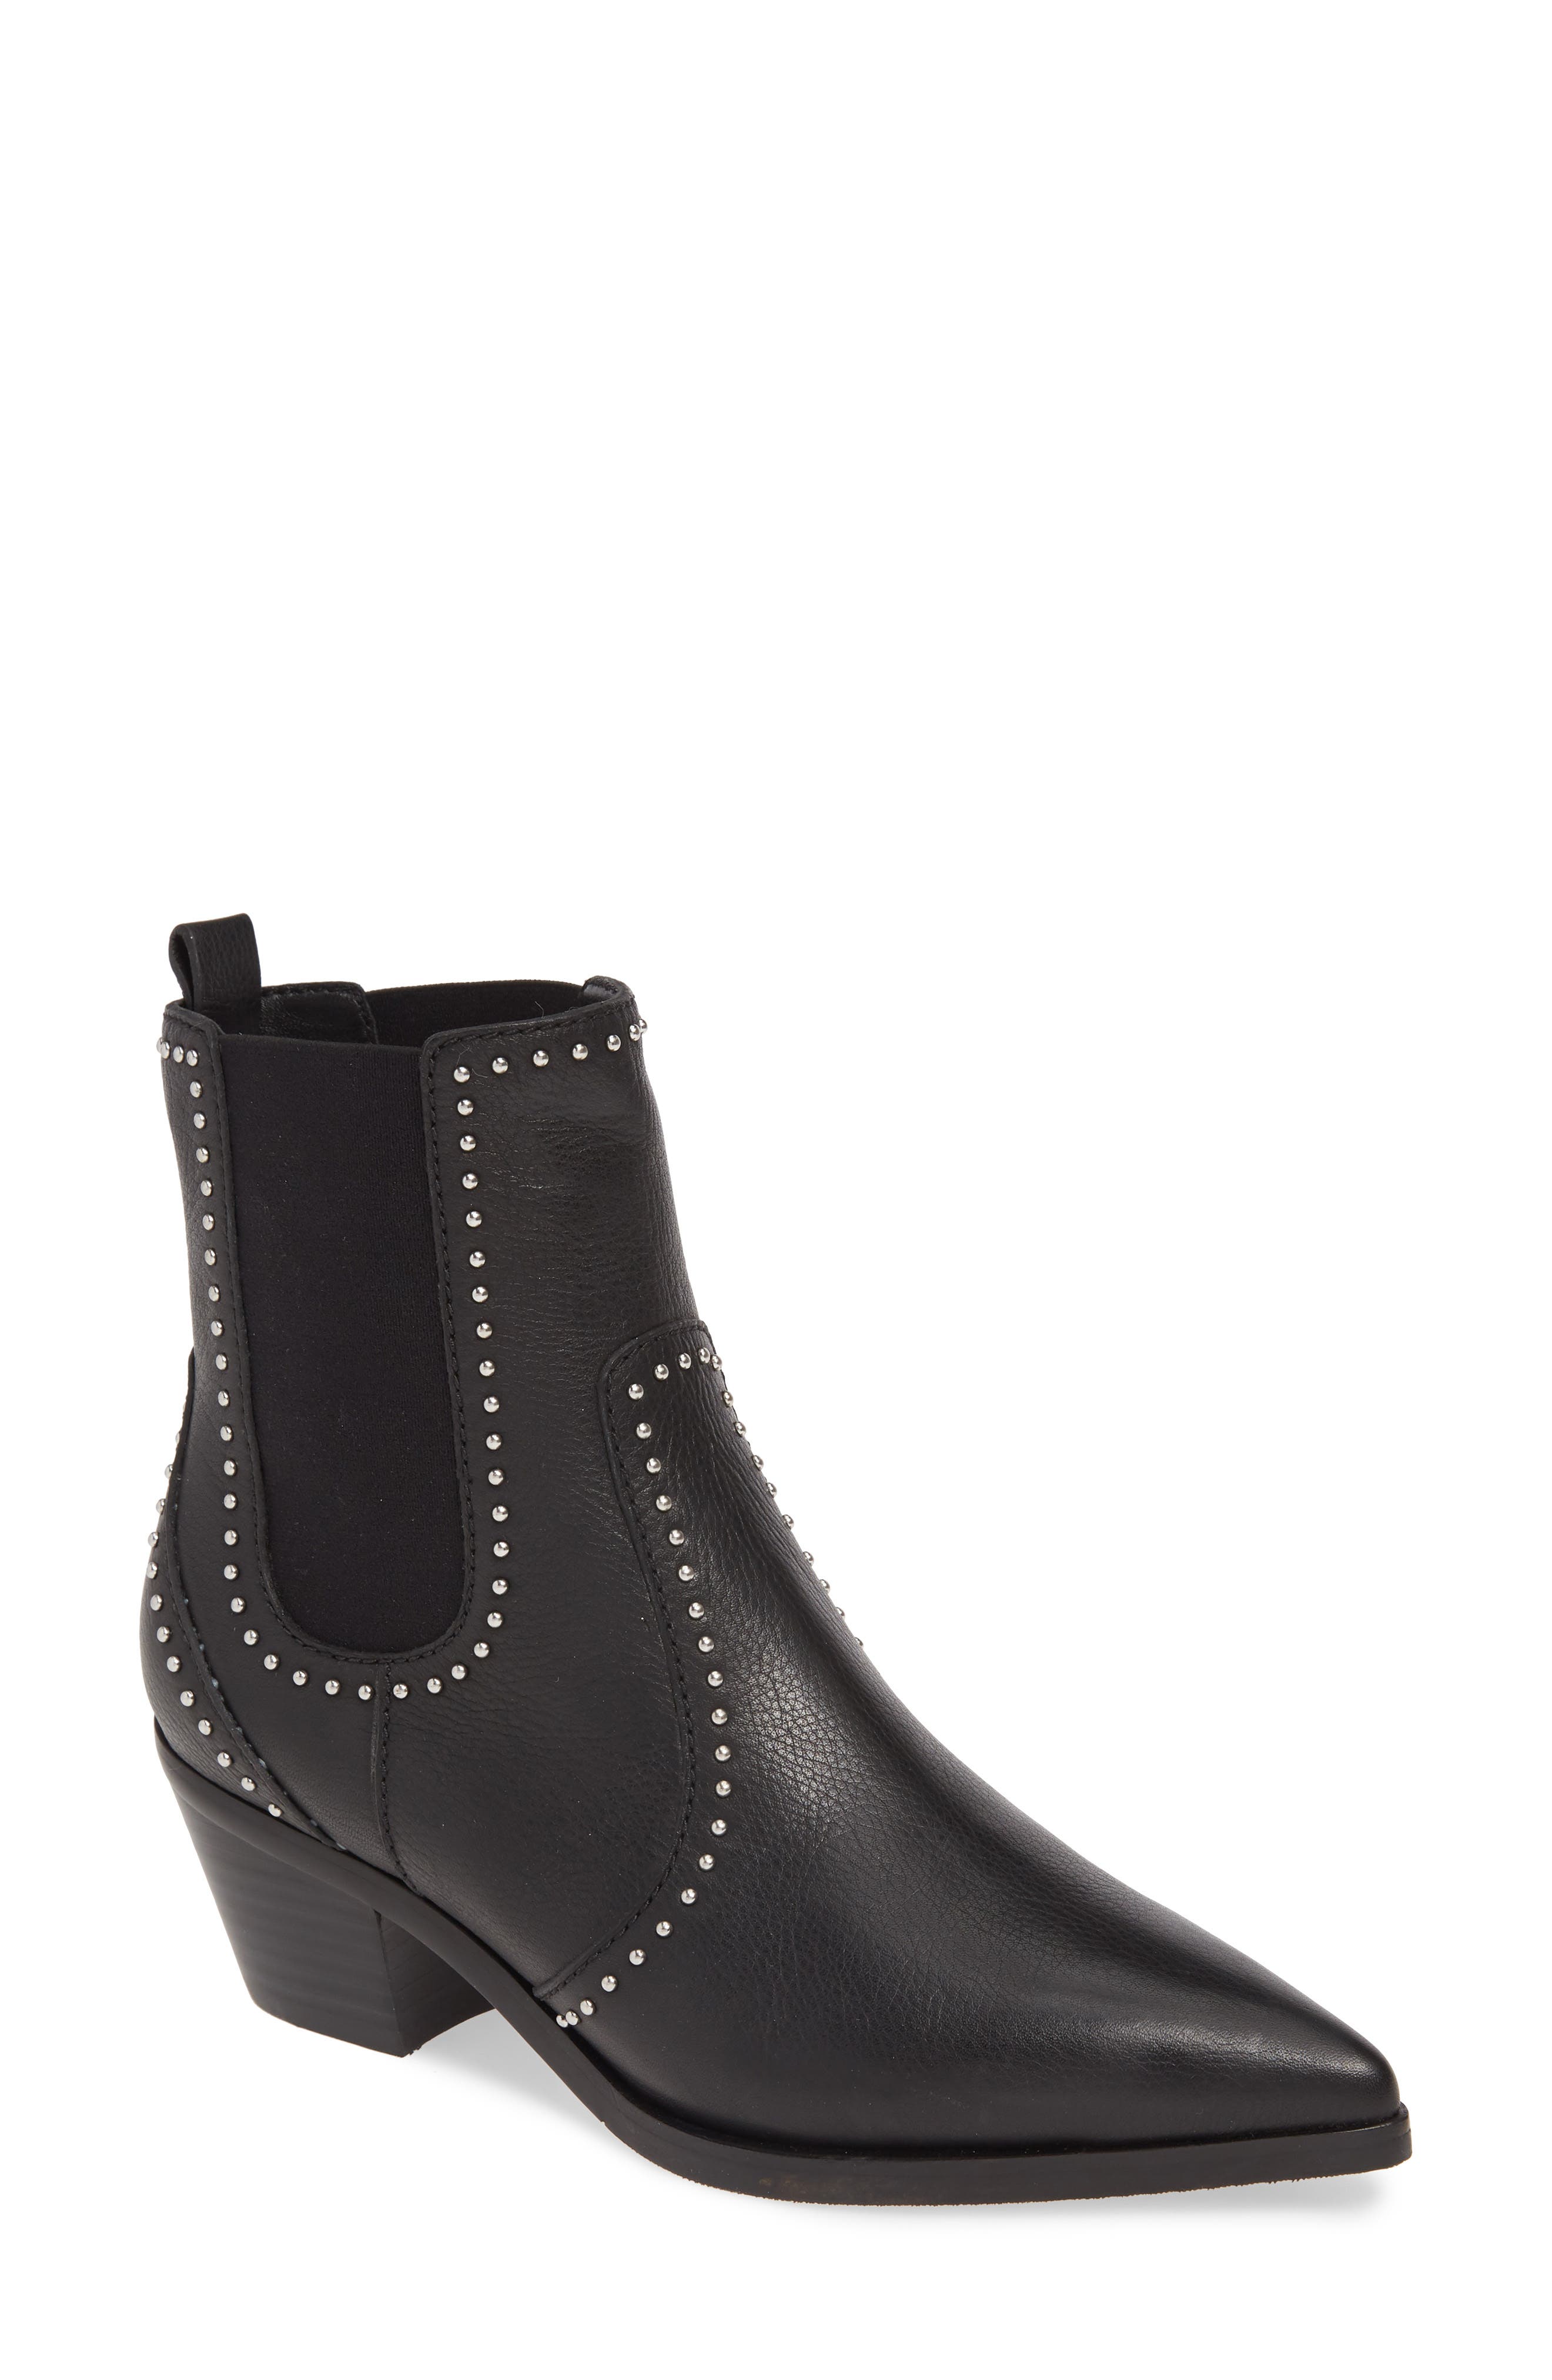 Sale > western studded chelsea boots > in stock